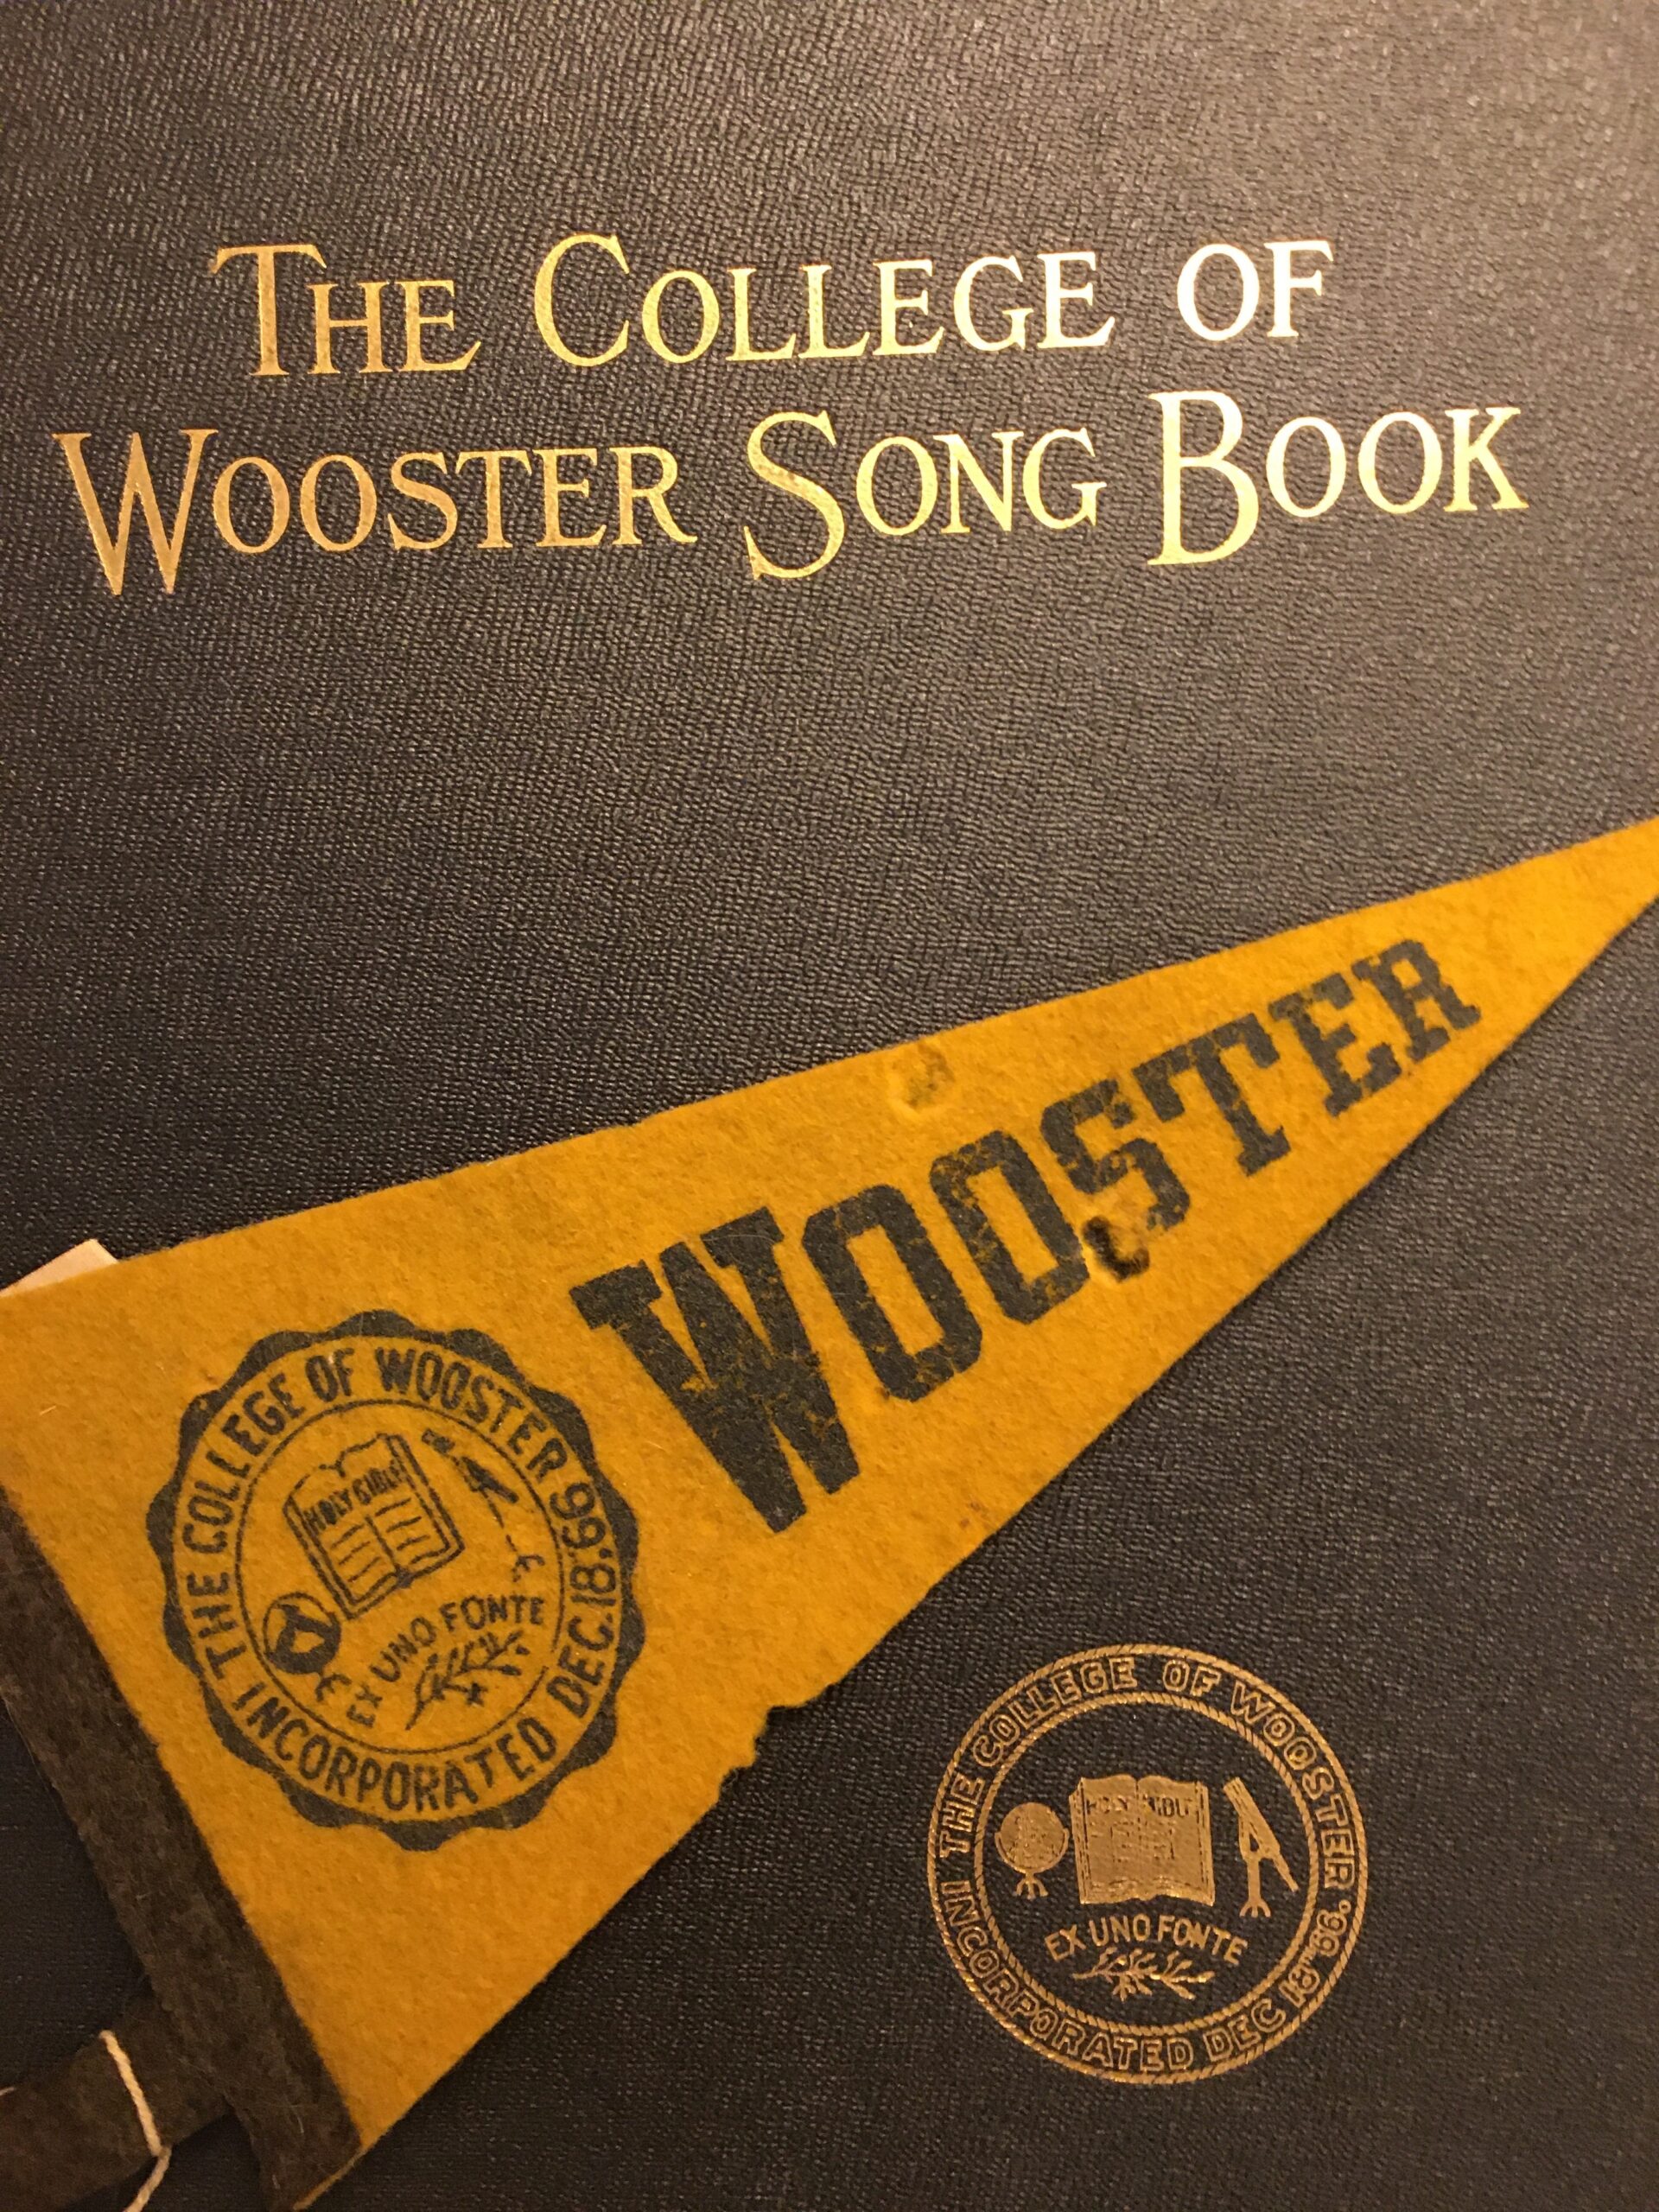 Photograph of the cover of "The College of Wooster Song Book" featuring and embossed seal of the college and a Wooster pennant.